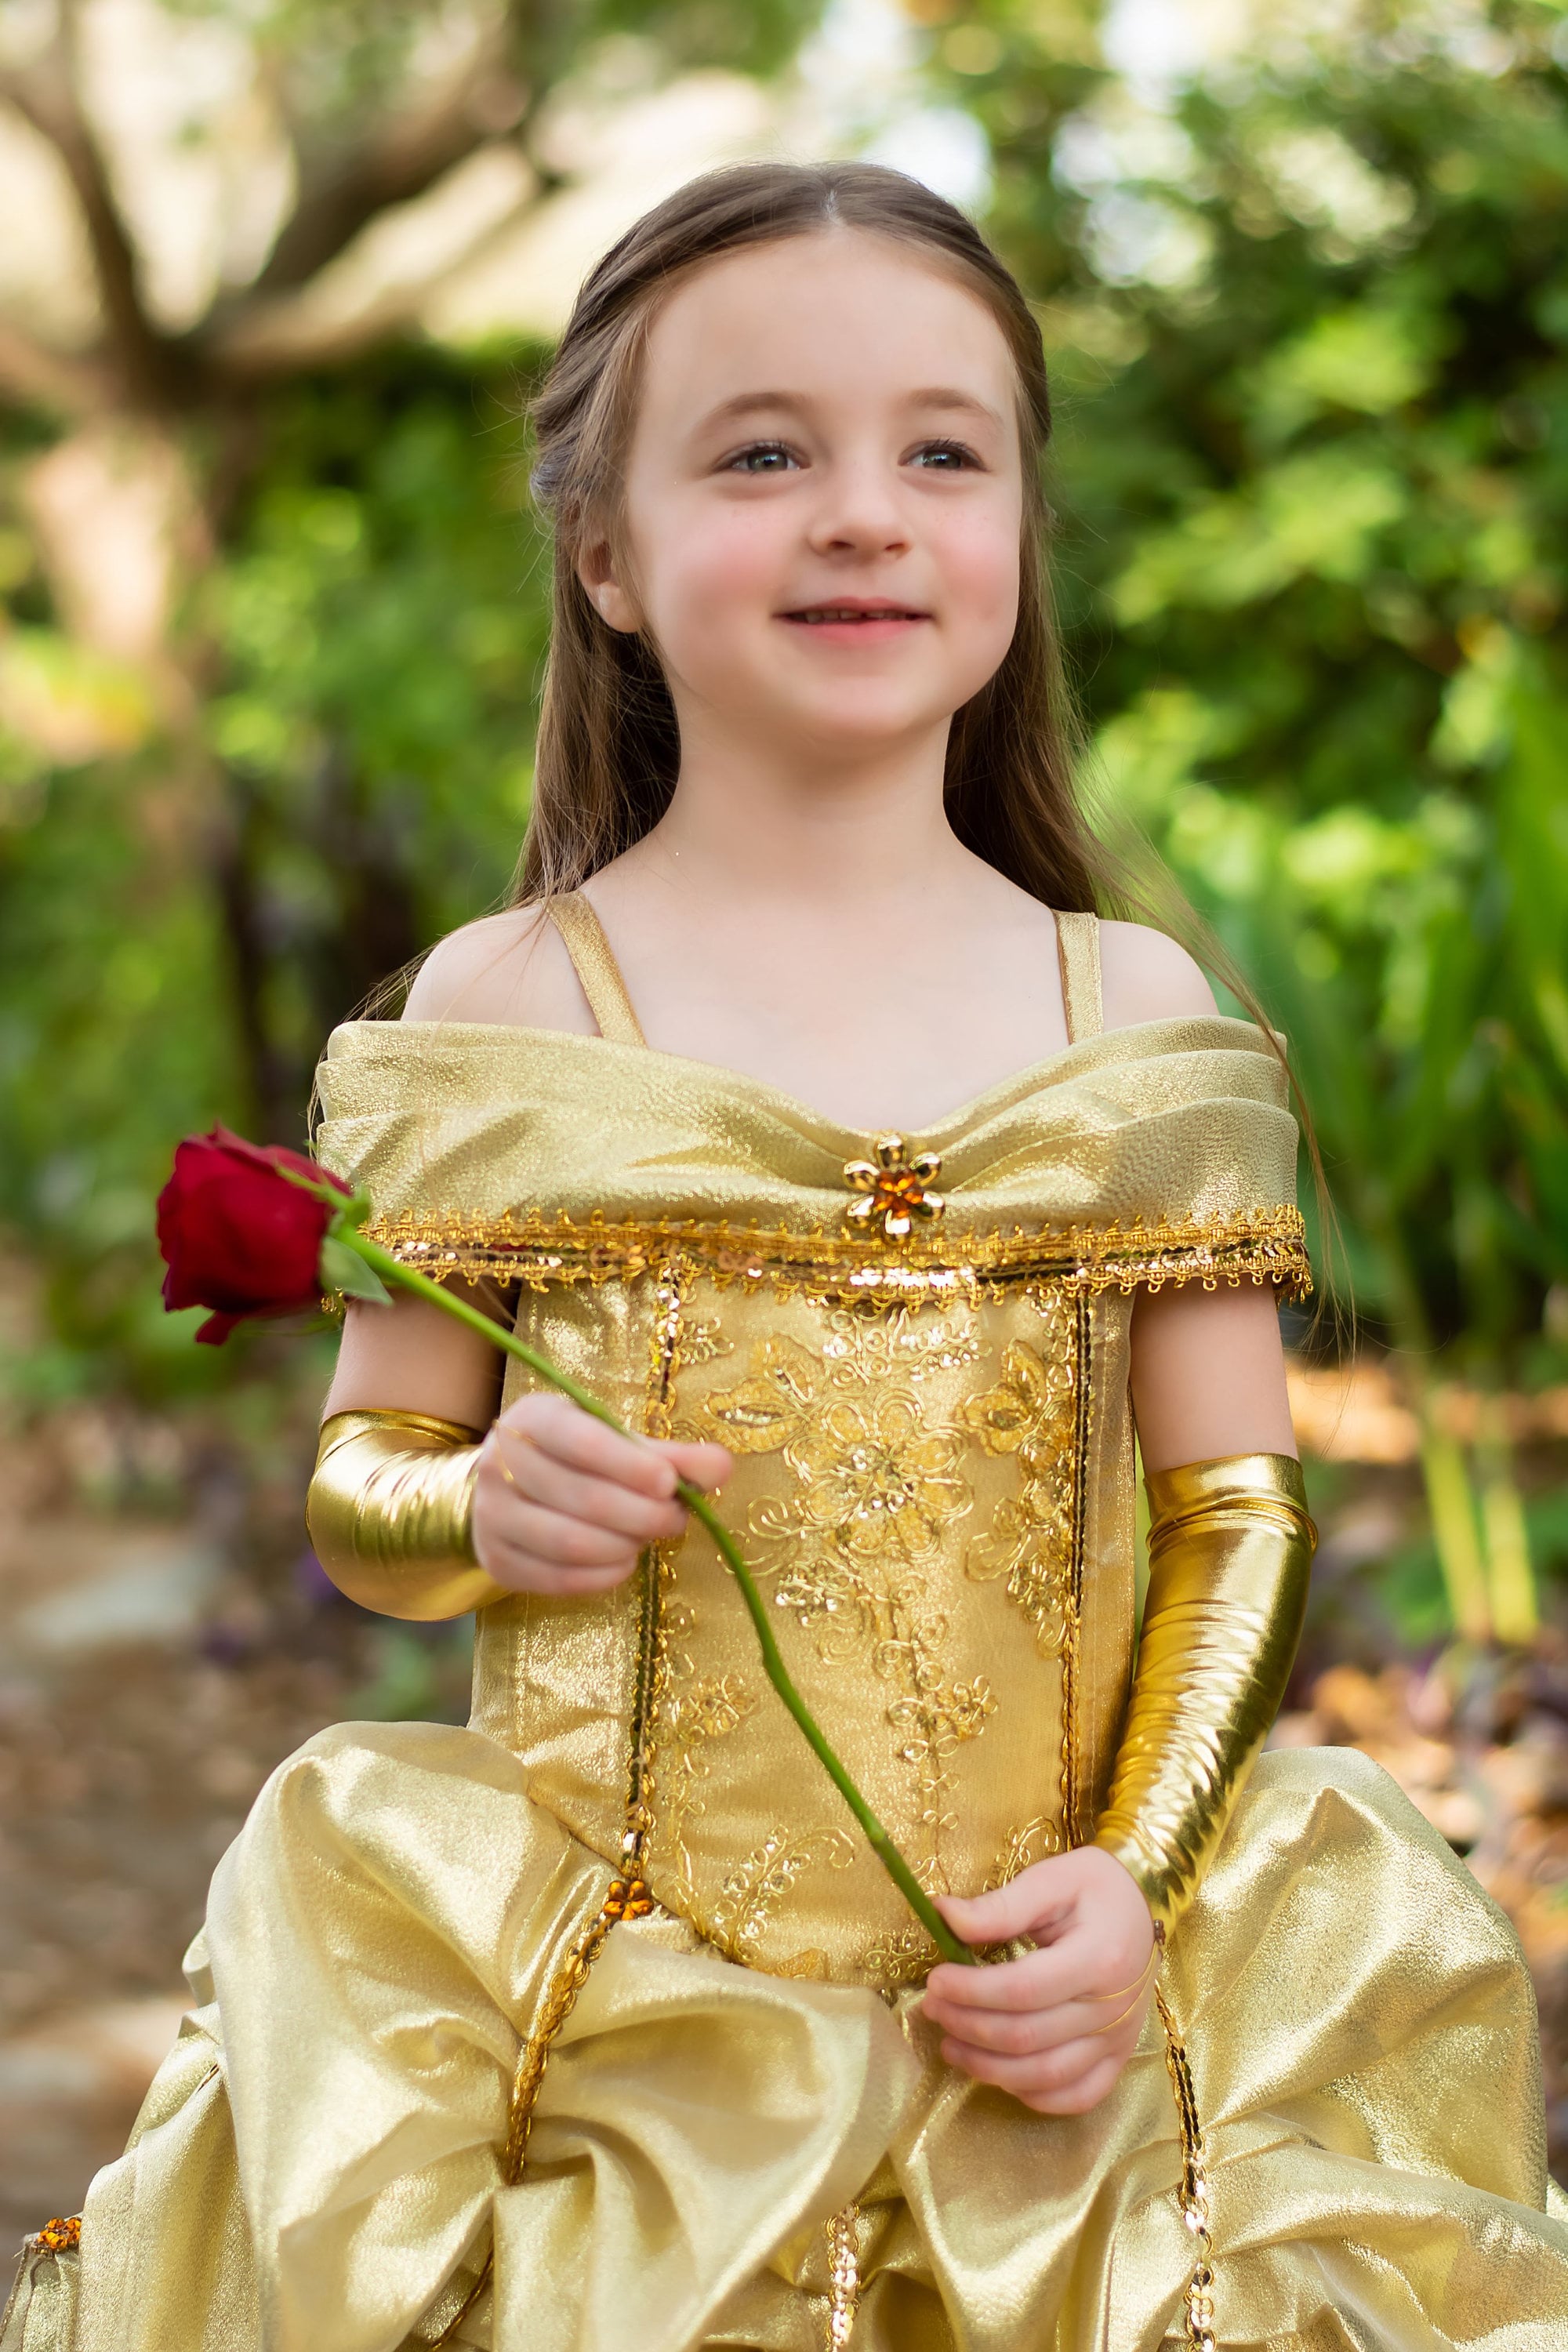 Belle Dress Belle Costume Disney Princess Beauty And The ...